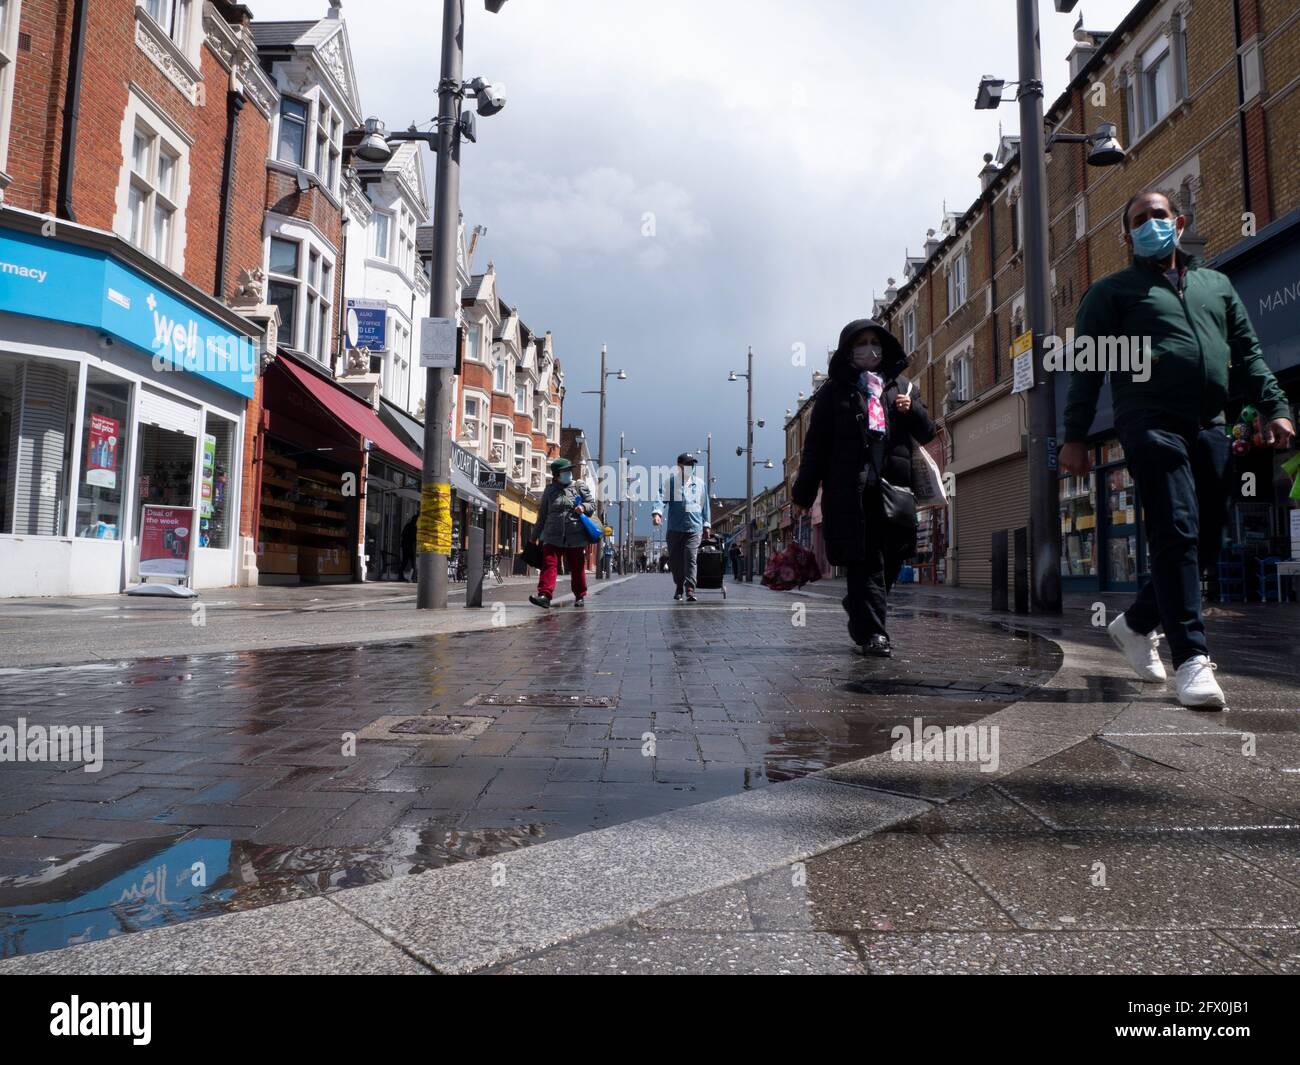 Walthamstow High Street, London with shoppers on quiet wet day Stock Photo